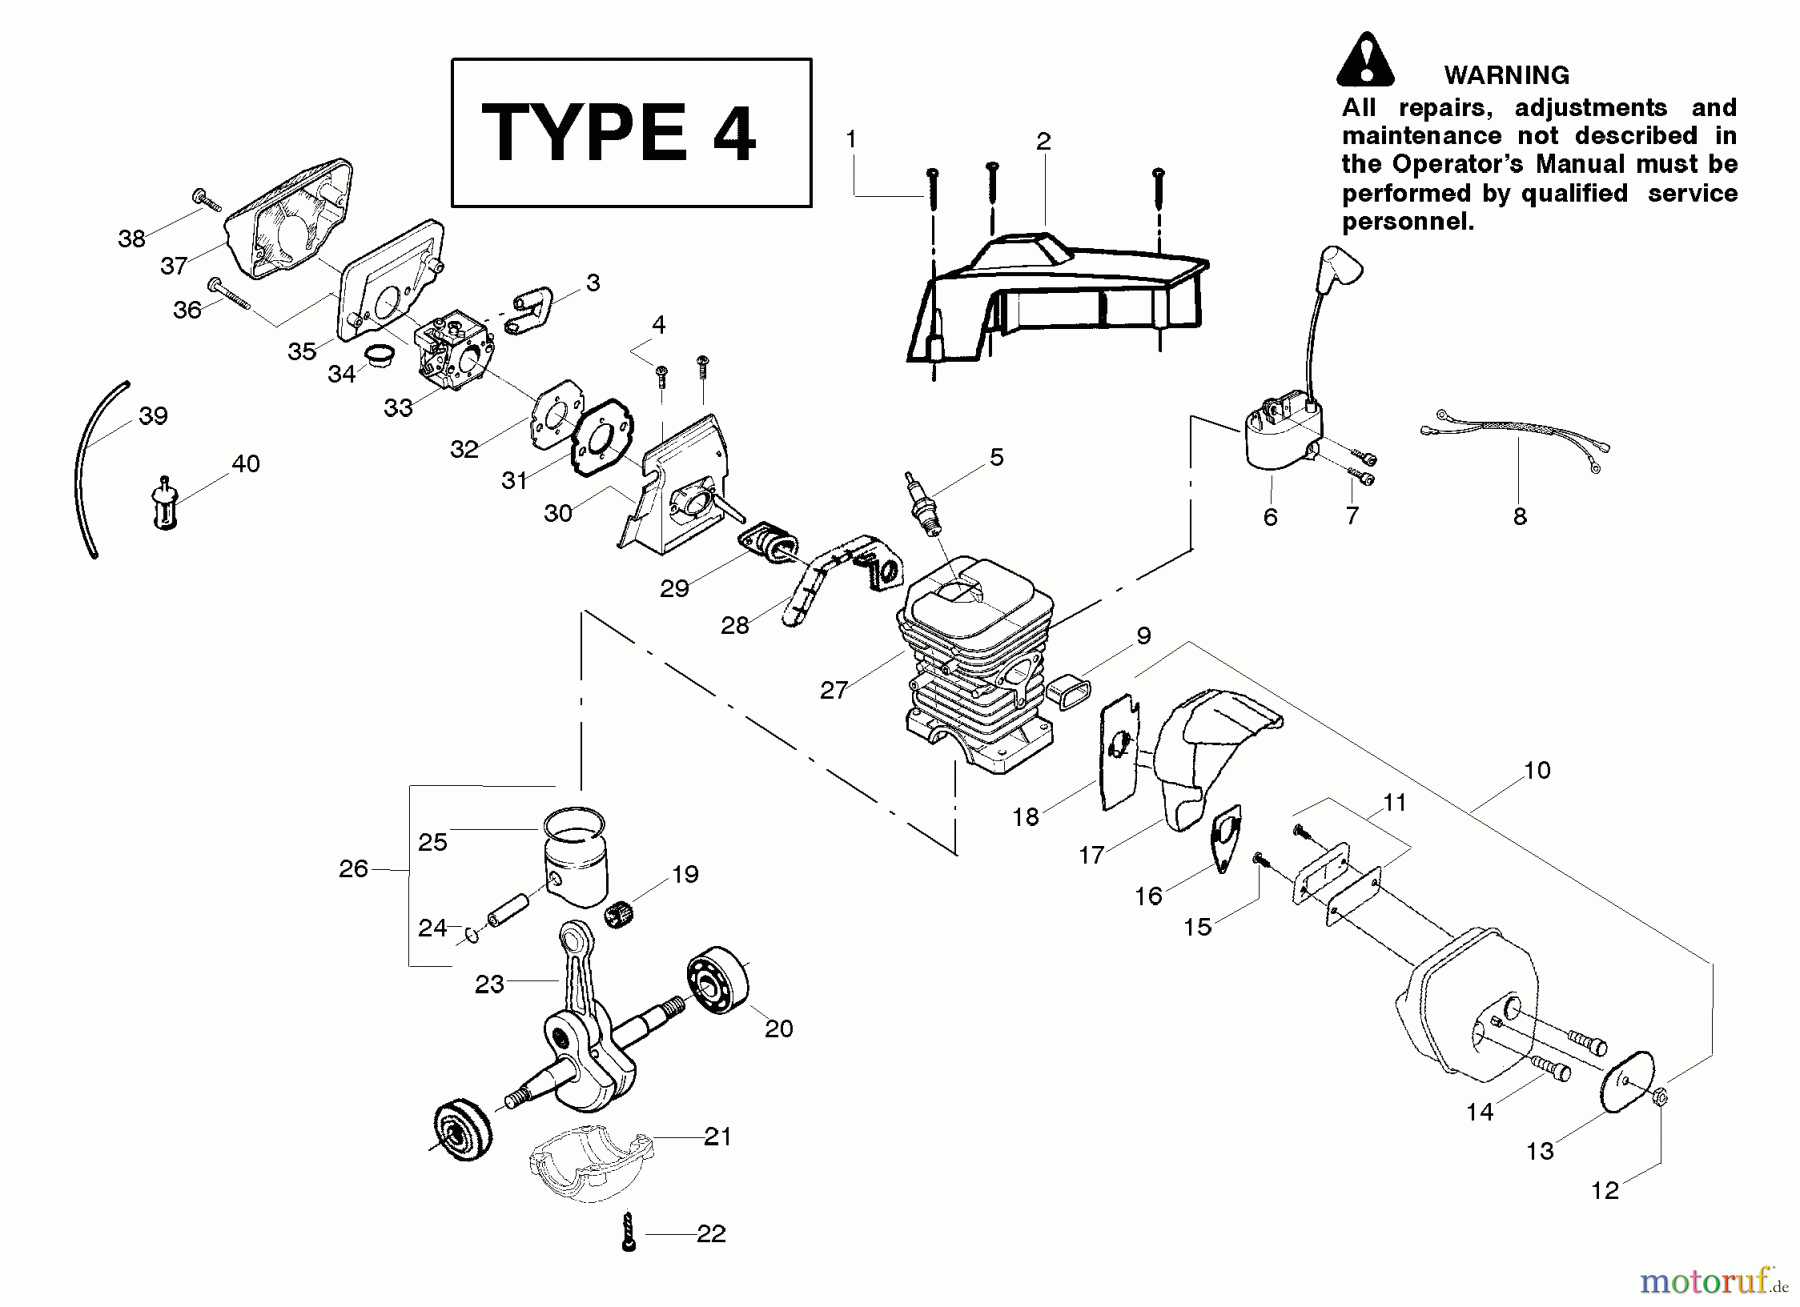  Poulan / Weed Eater Motorsägen PP295 (Type 4) - Poulan Pro Chainsaw Engine Assembly Type 4